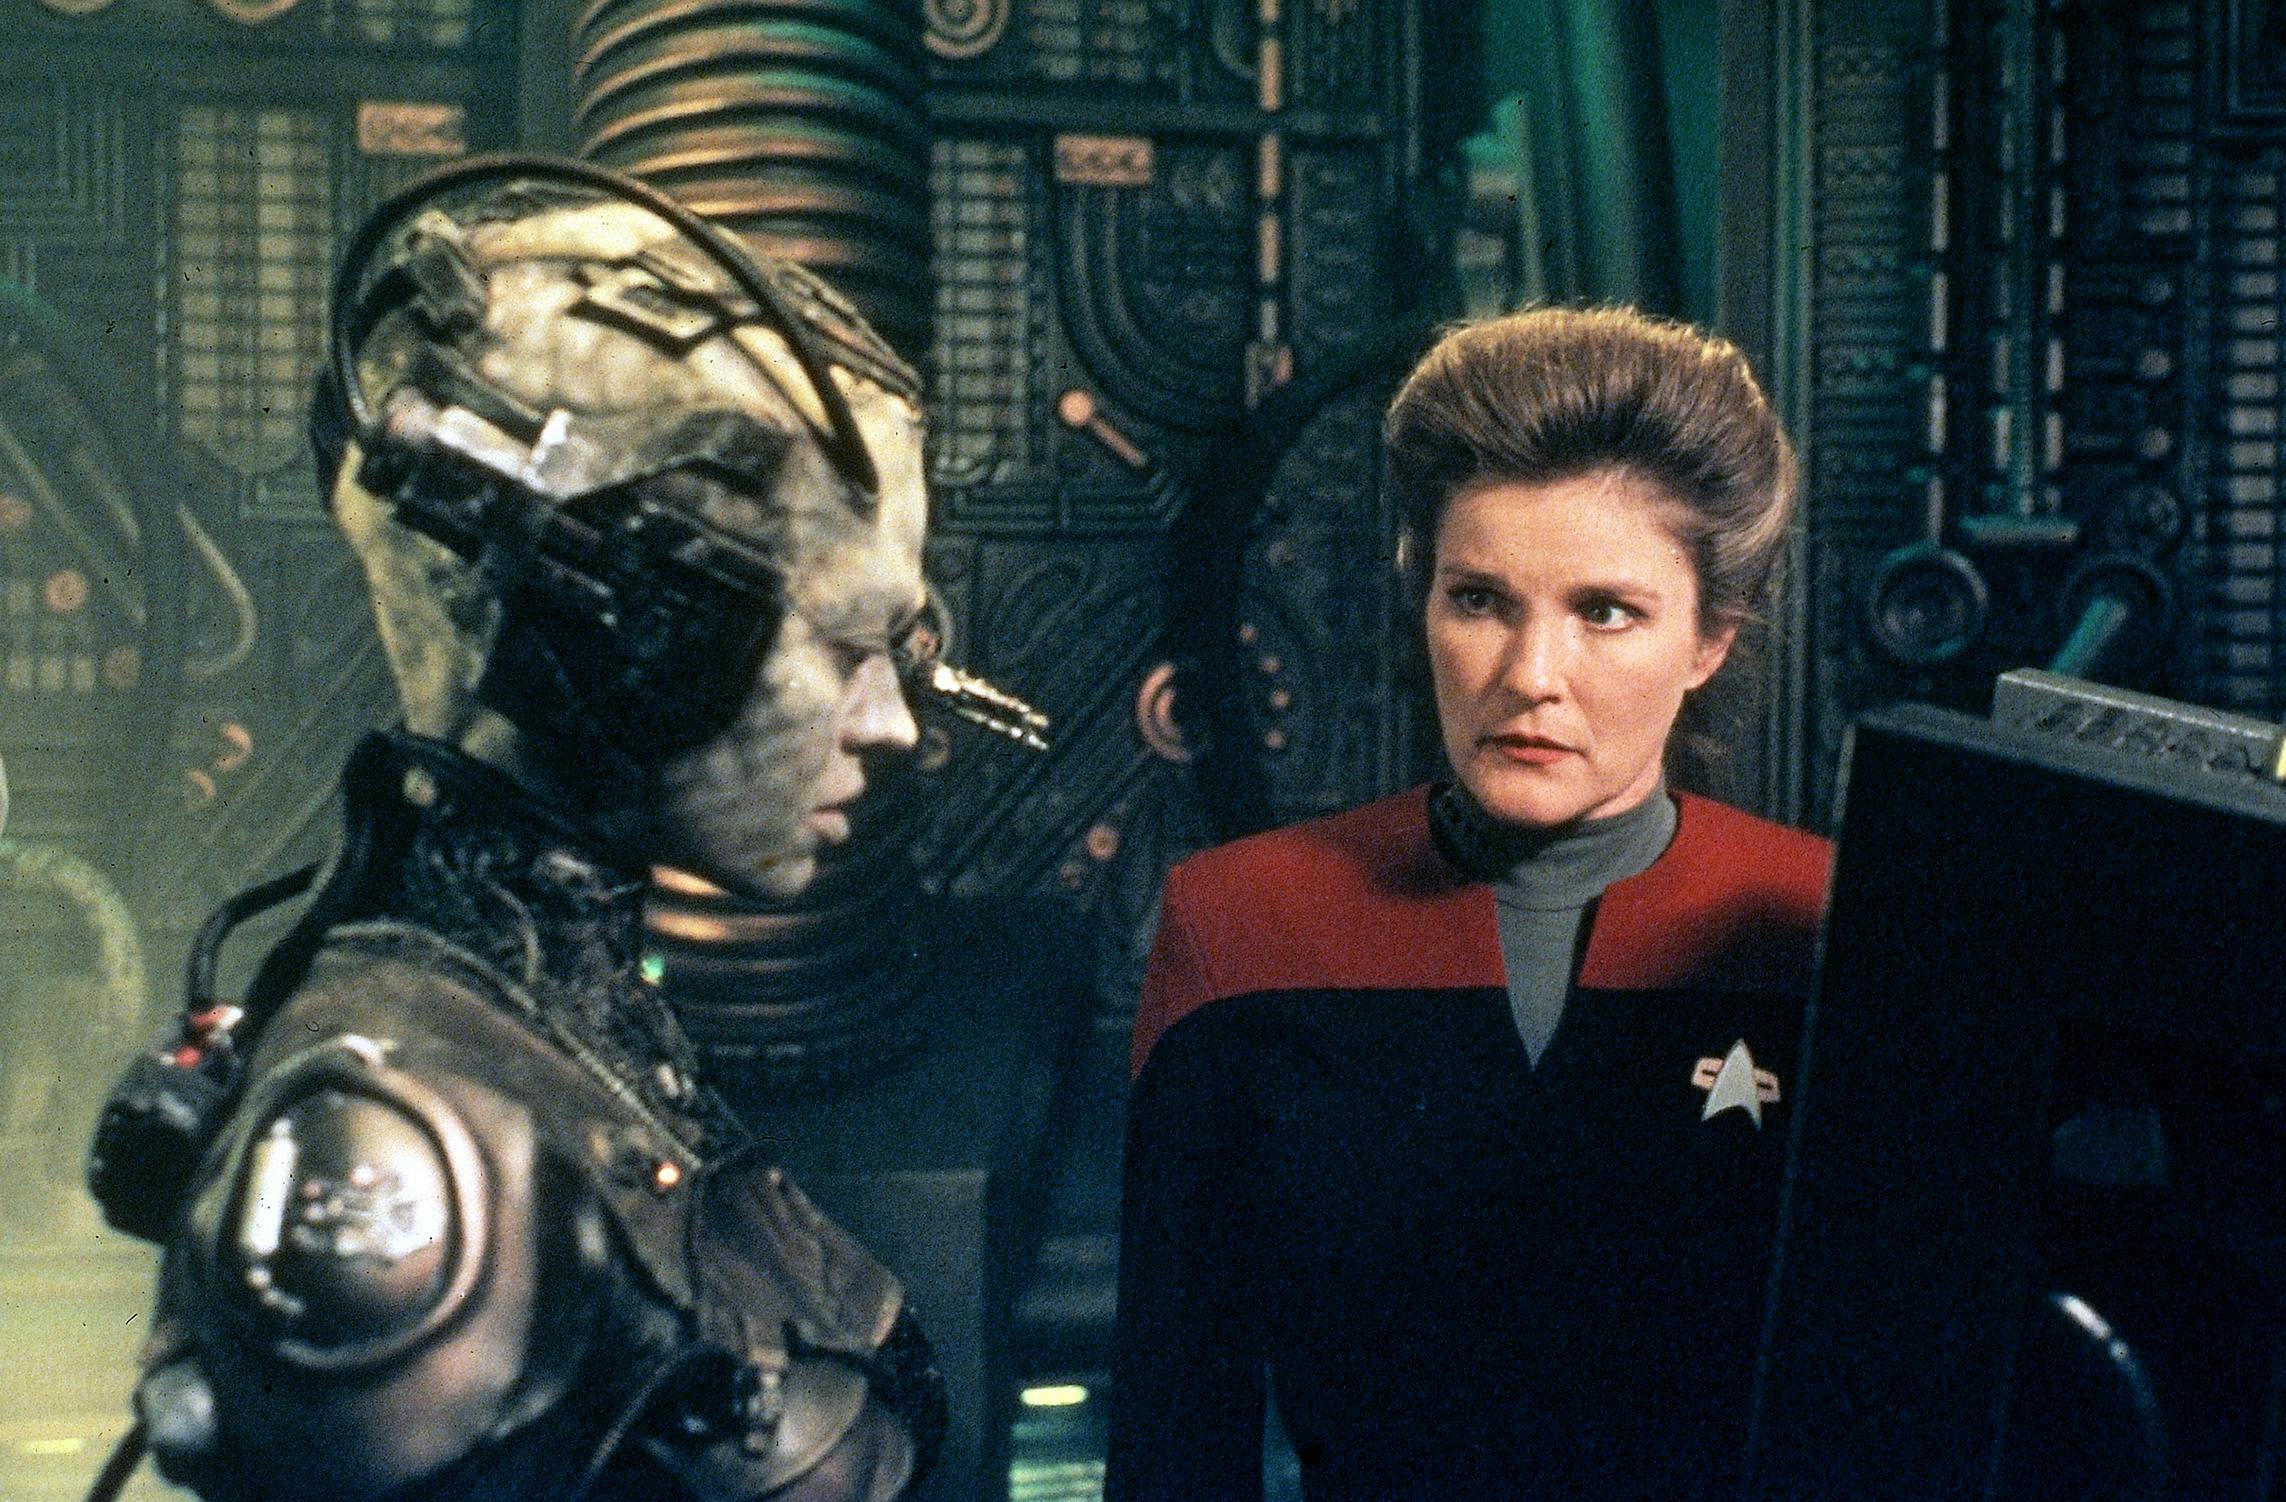 Captain Kathryn Janeway from Star Trek: Voyager with Borg Seven of Nine.